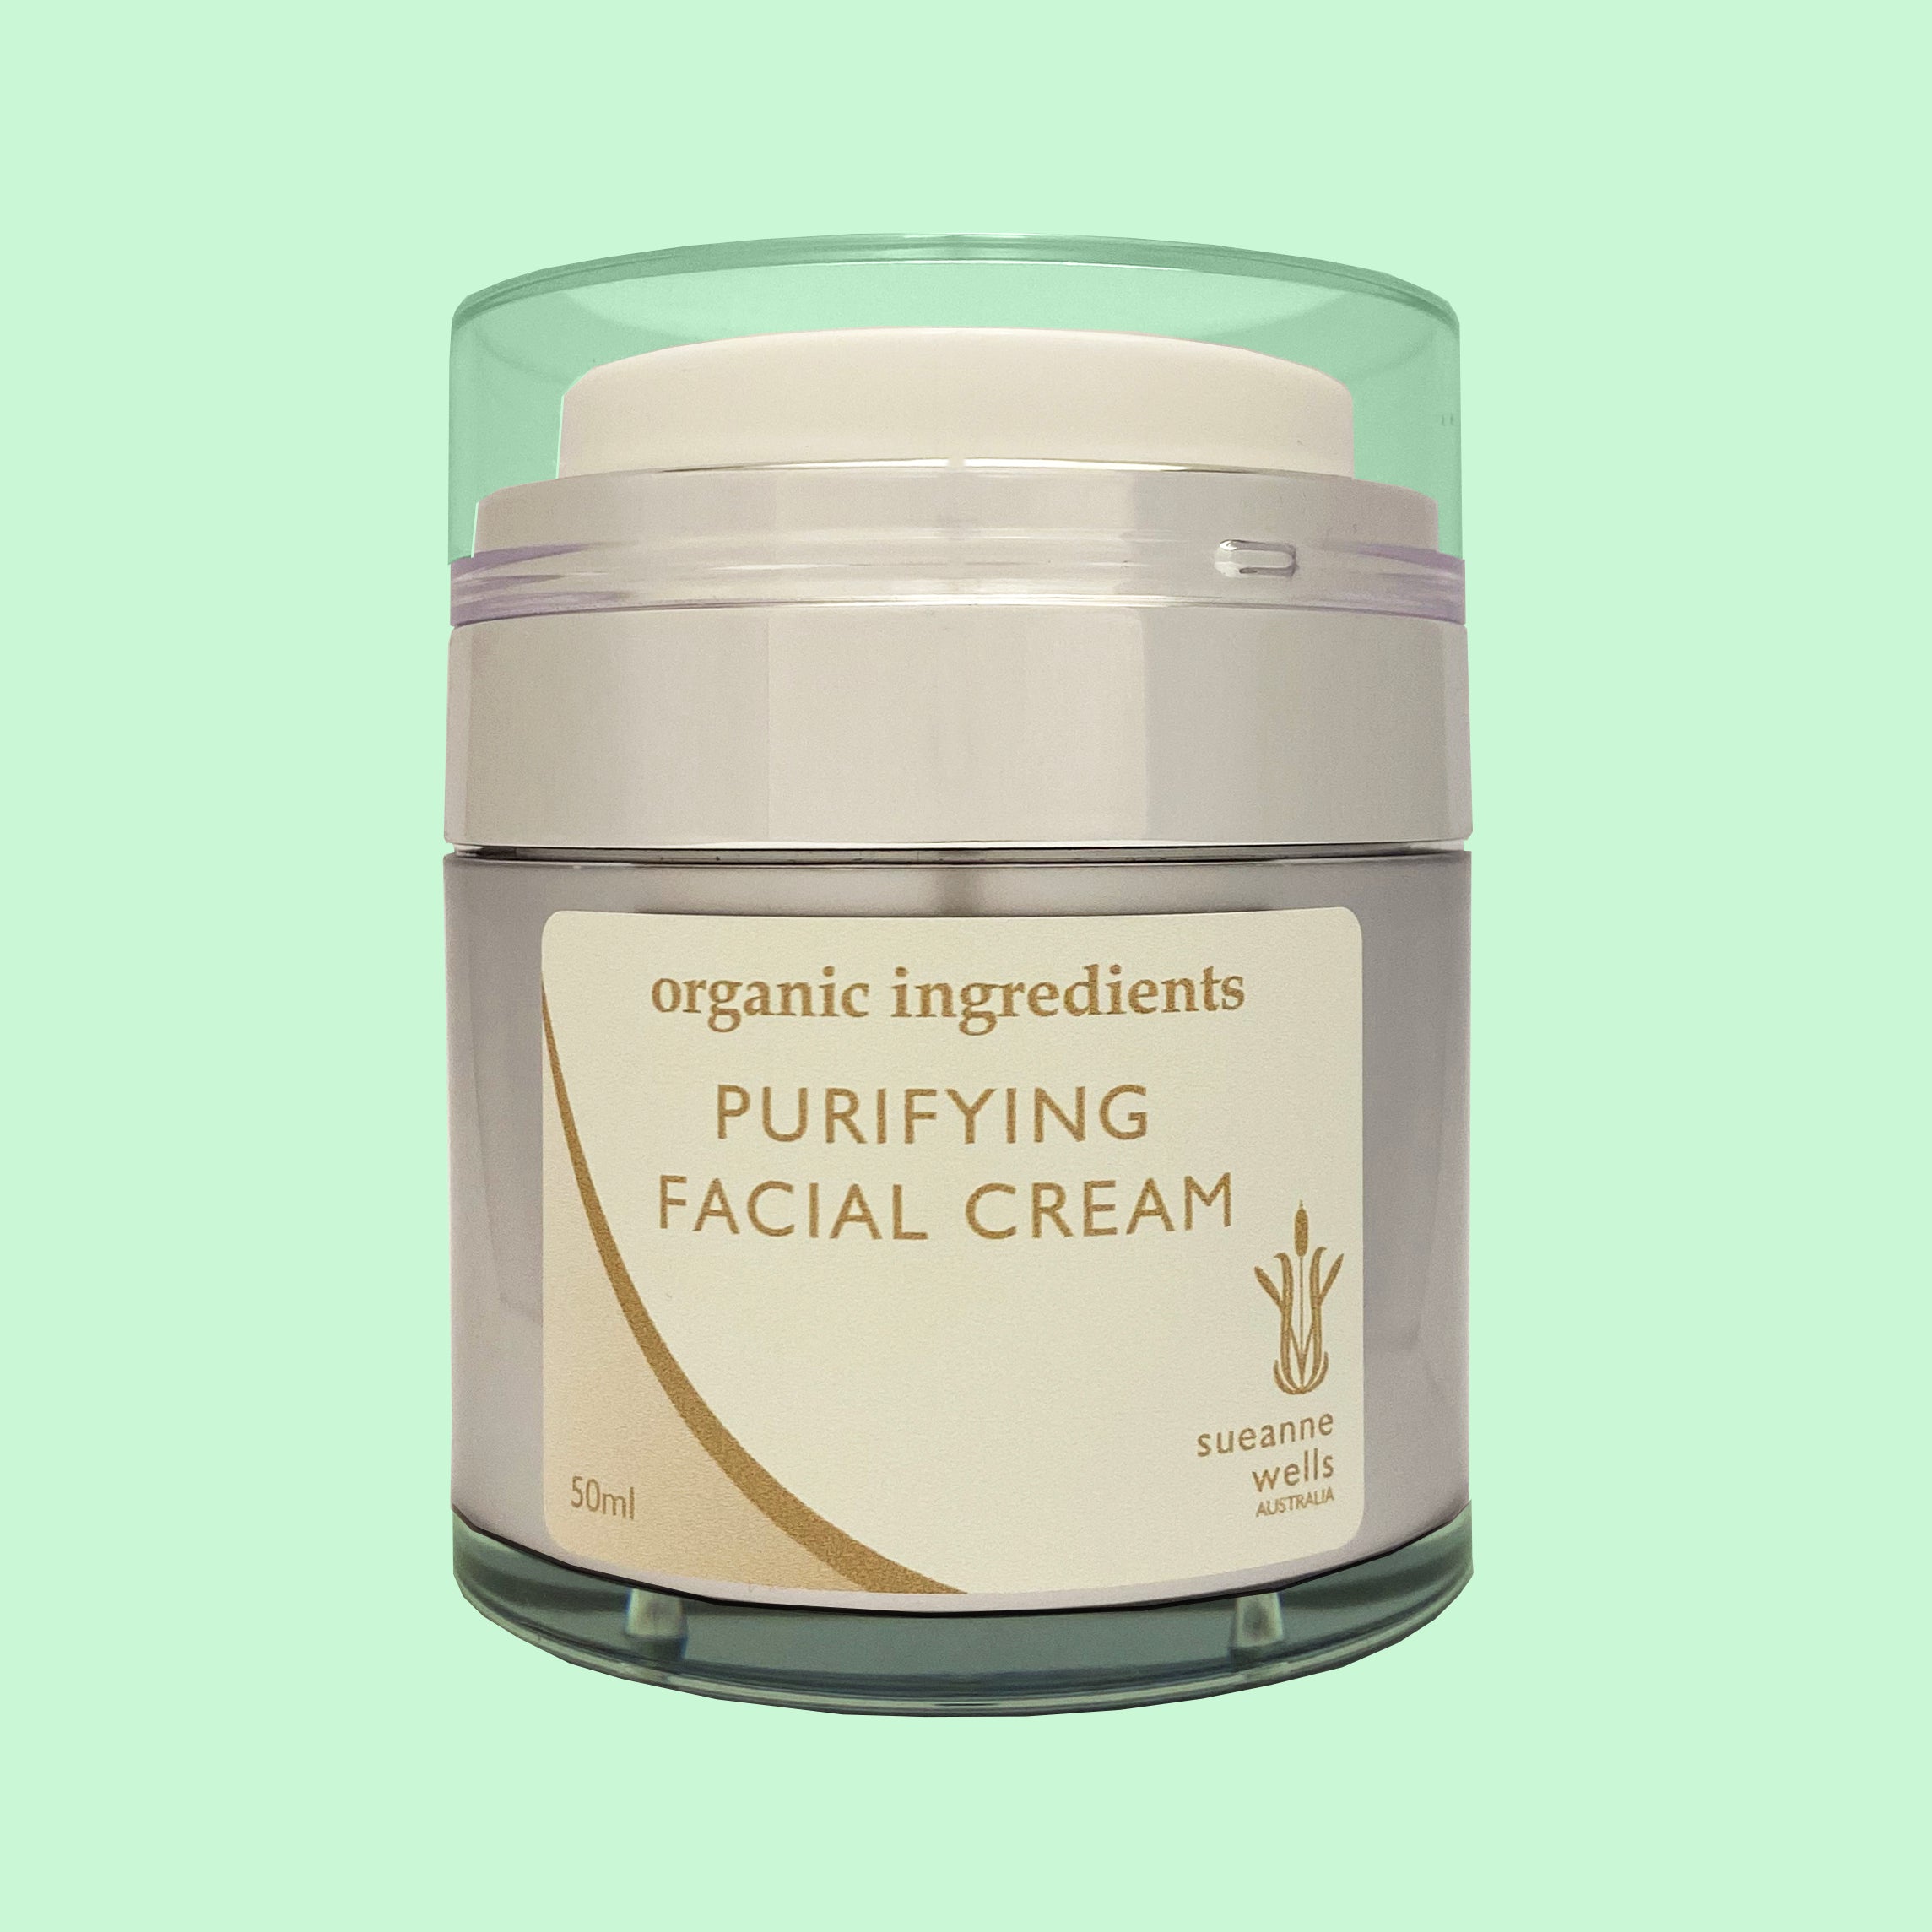 A light cream with amazing purifying and antioxidant properties. Dramatically transforms the look and feel of your skin. Contains Aloe Vera, Marine Collagen, Rice Bran Oil, Rose Hip Oil, Hyaluronic, Vitamin E, Green Tea Extract & Coenzyme Q10, Vegetable Glycerin, Plantaserv S, Rose Geranium Essential Oil. Skin Care, Chemical And Preservative Free, Plant Based, Australian Made.